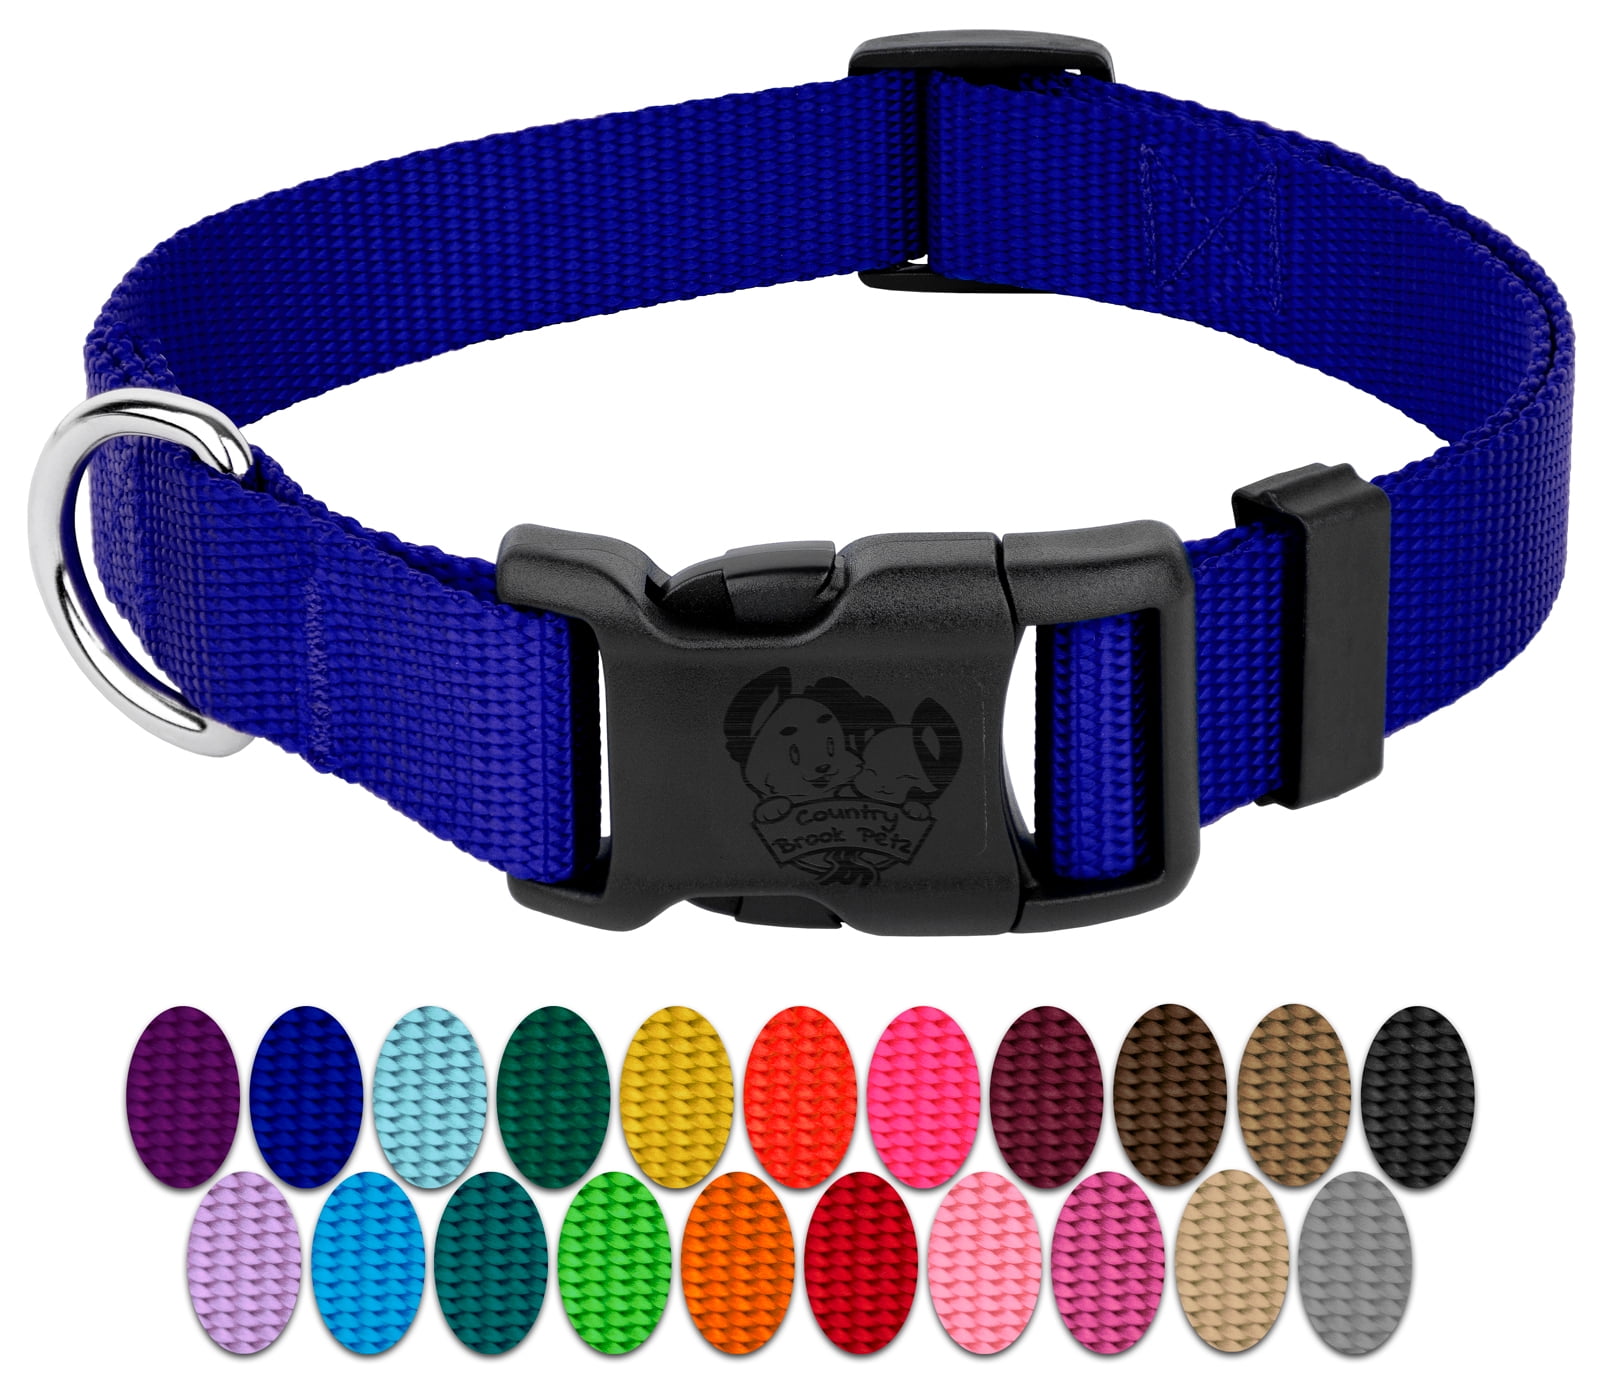 Country Brook Petz® American Made Deluxe Bright Royal Blue Nylon Dog Collar, Small